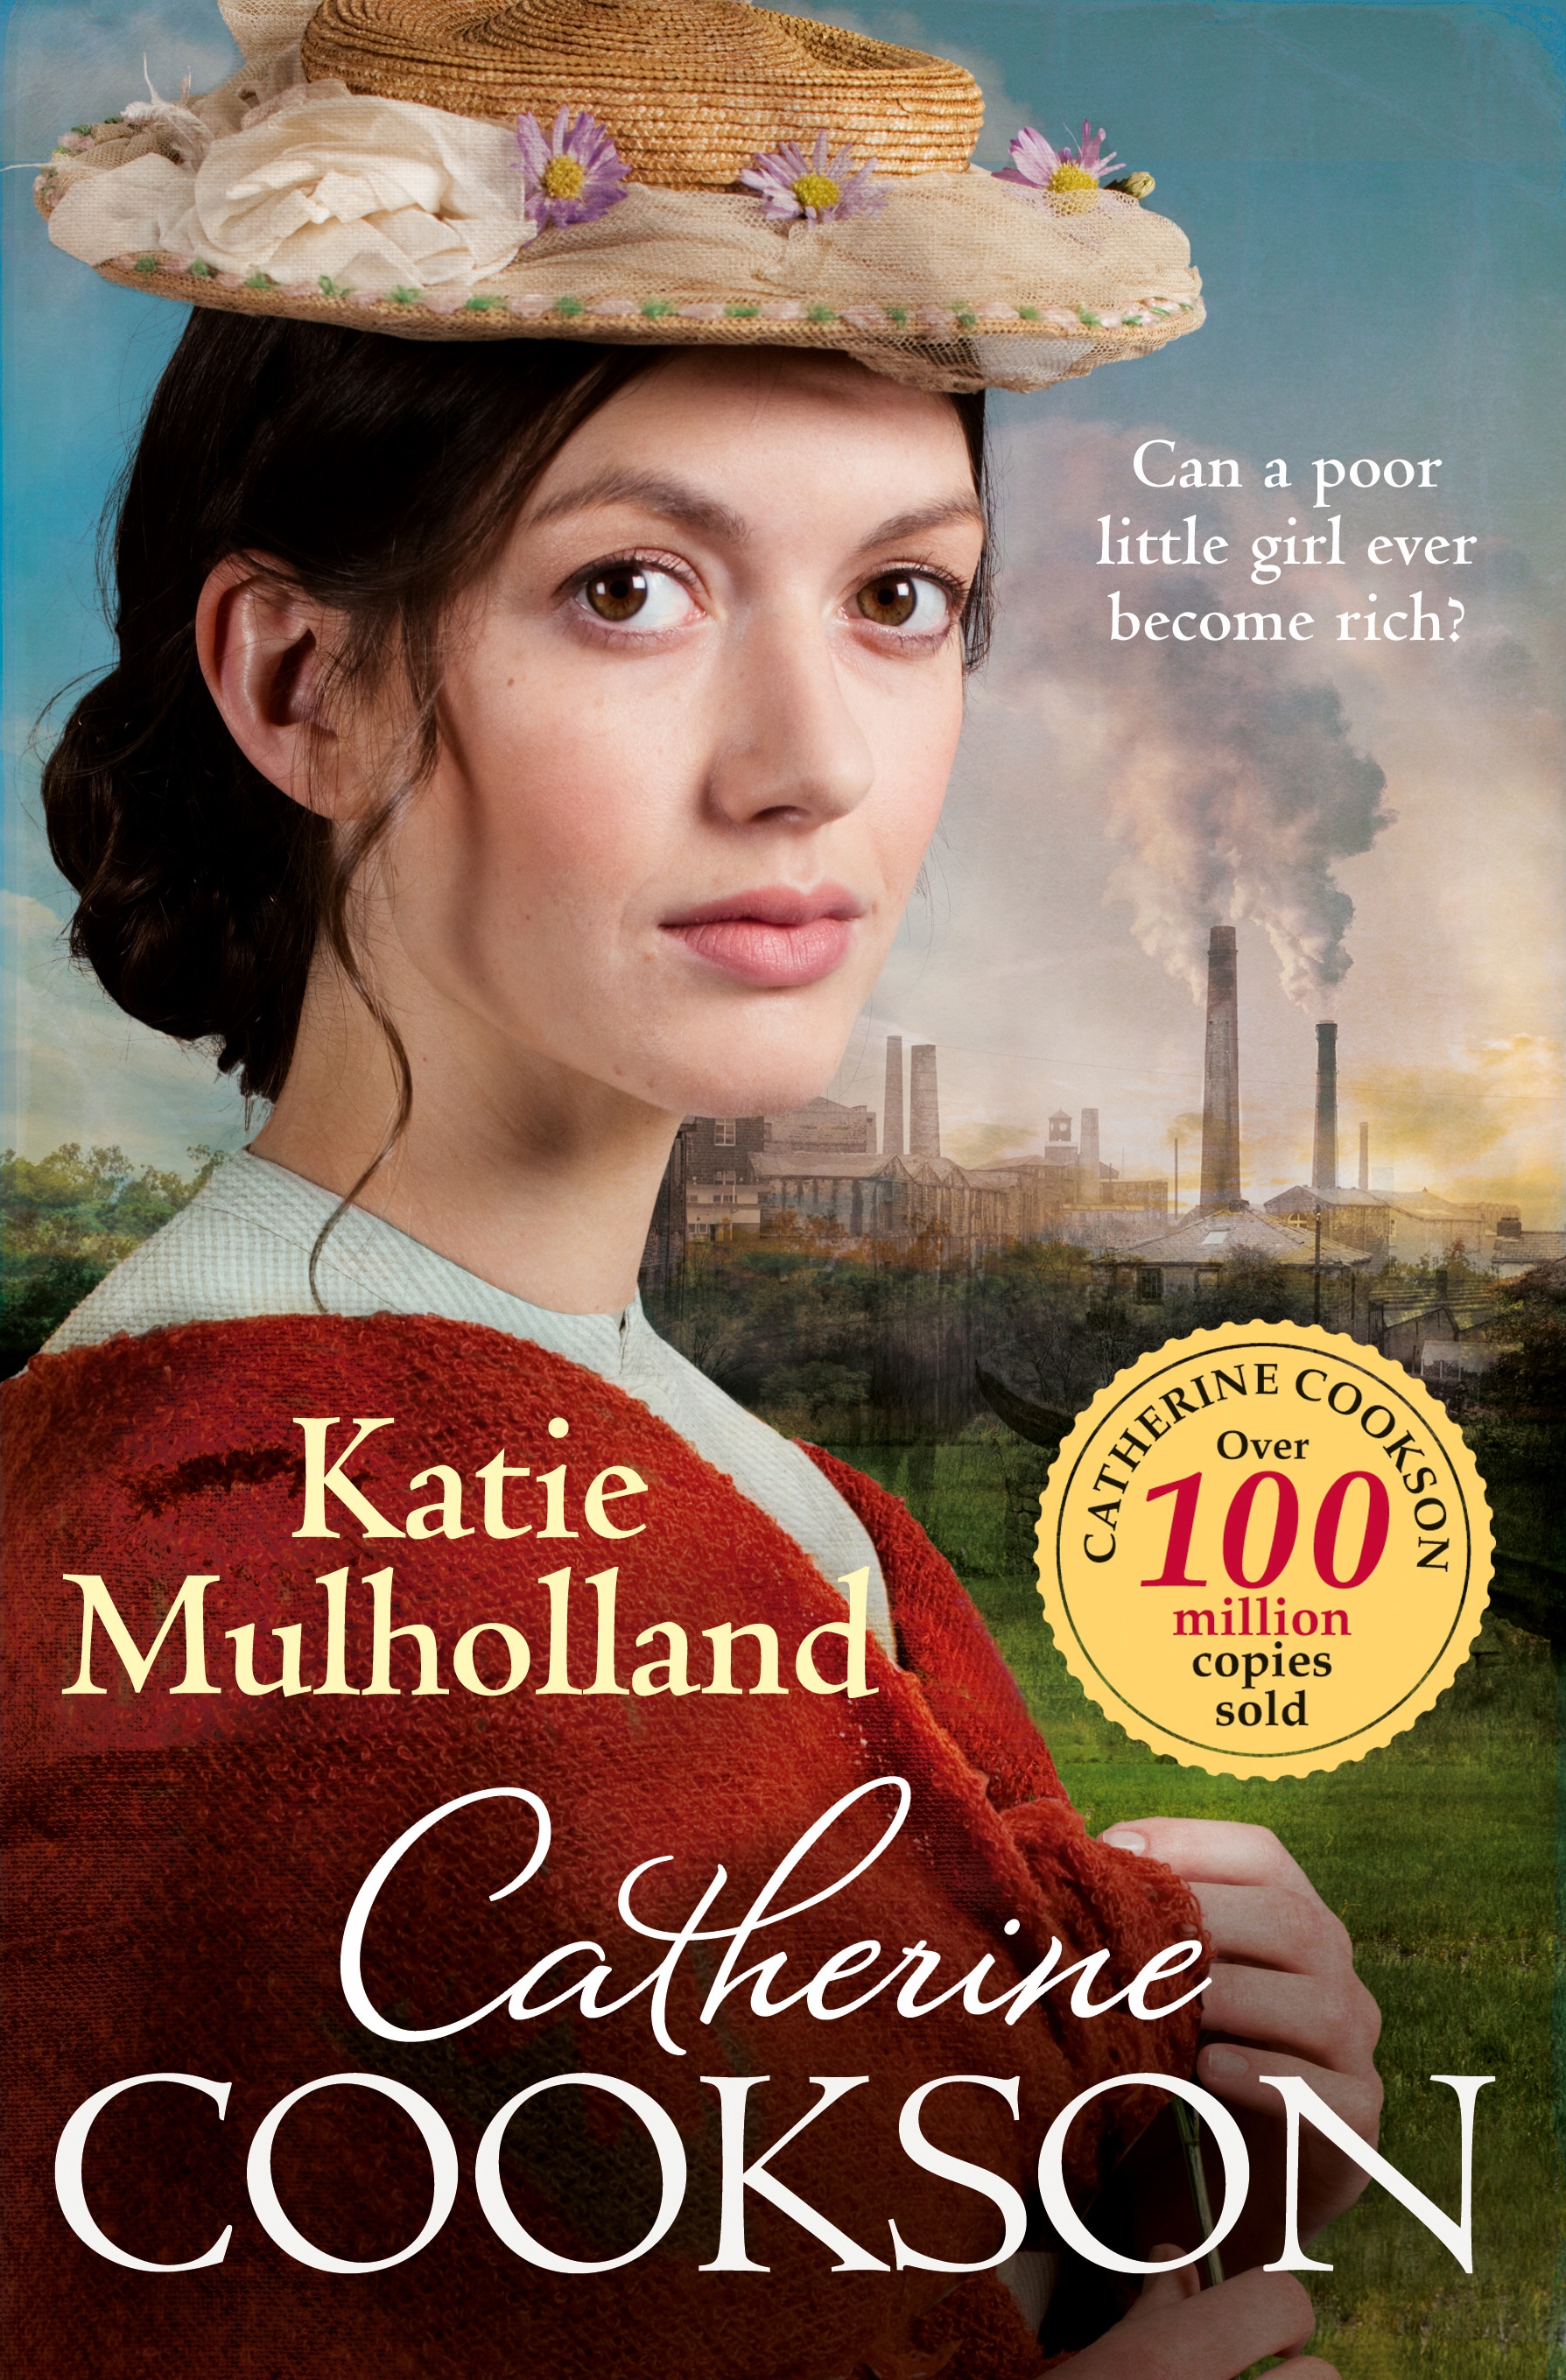 Book “Katie Mulholland” by Catherine Cookson — September 5, 2019